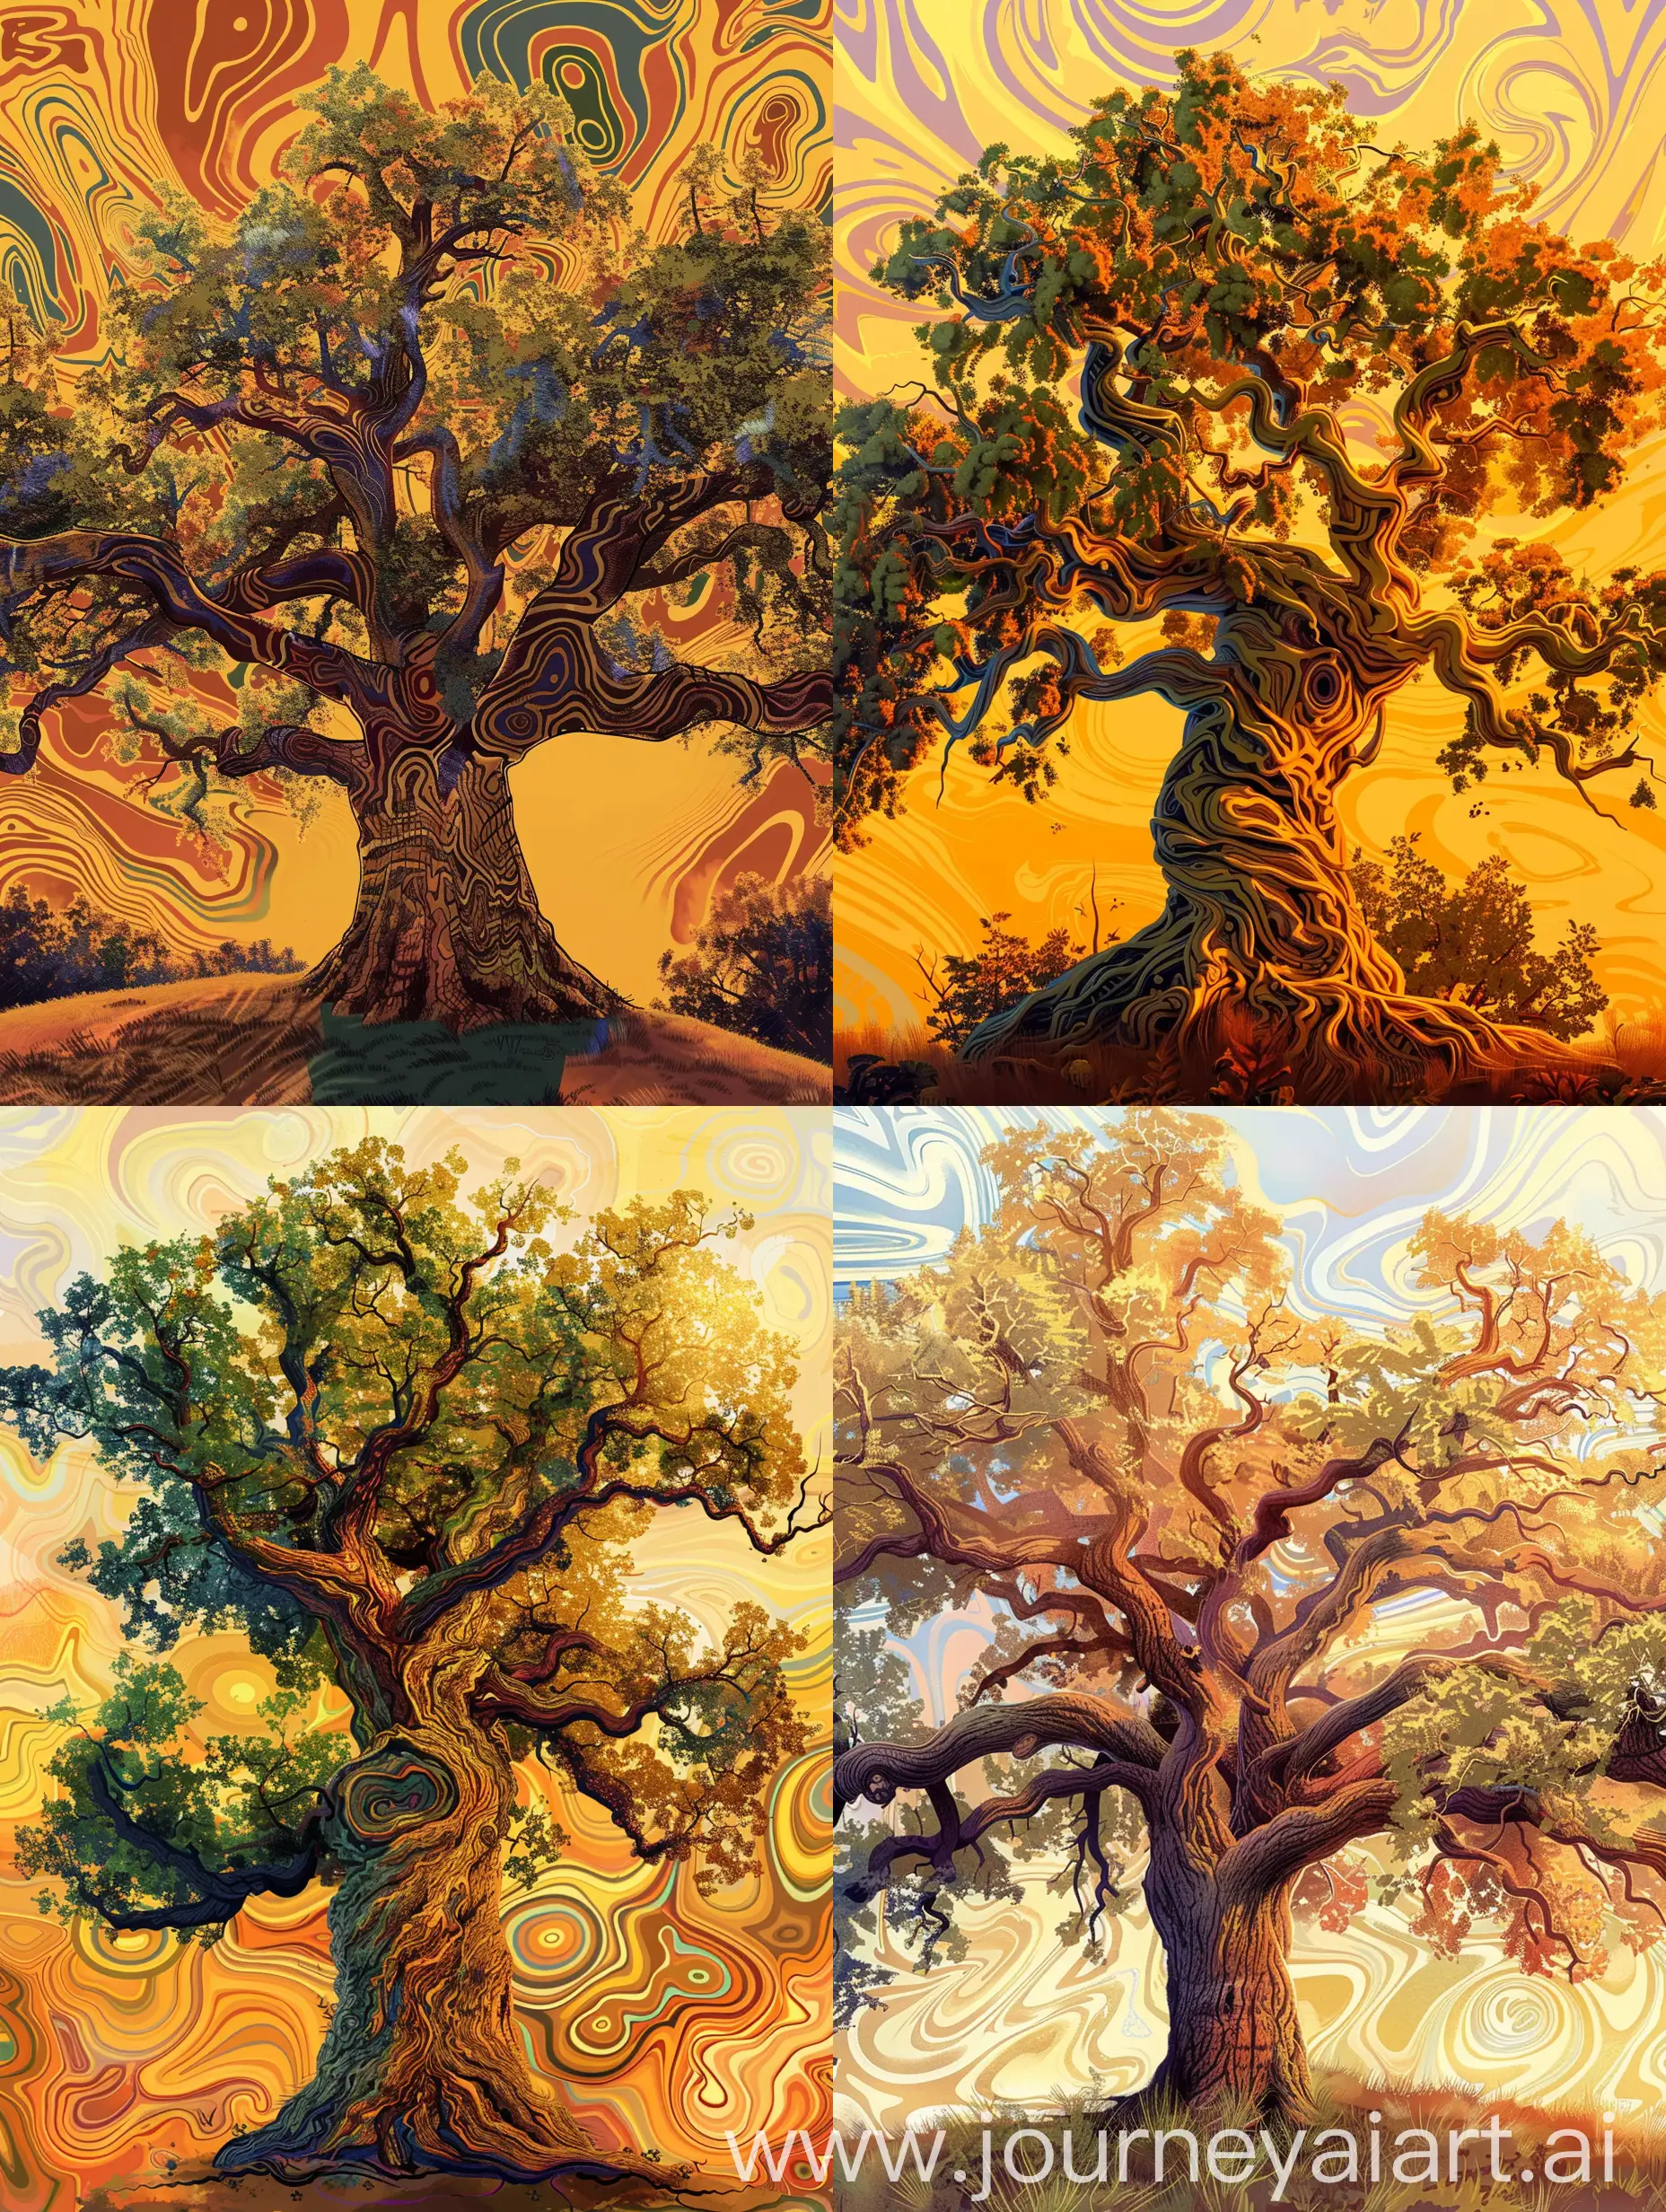 Illustration of a majestic oak tree in warm sunrise light transformed into an artwork inspired by Vincent van Gogh's style; bold brush strokes, swirling patterns, and vibrant colors dominate the scene. The tree retains its grandeur, but the essence shifts to a dreamy, emotionally charged interpretation with exaggerated textures and a dynamic composition reminiscent of van Gogh's masterpieces.